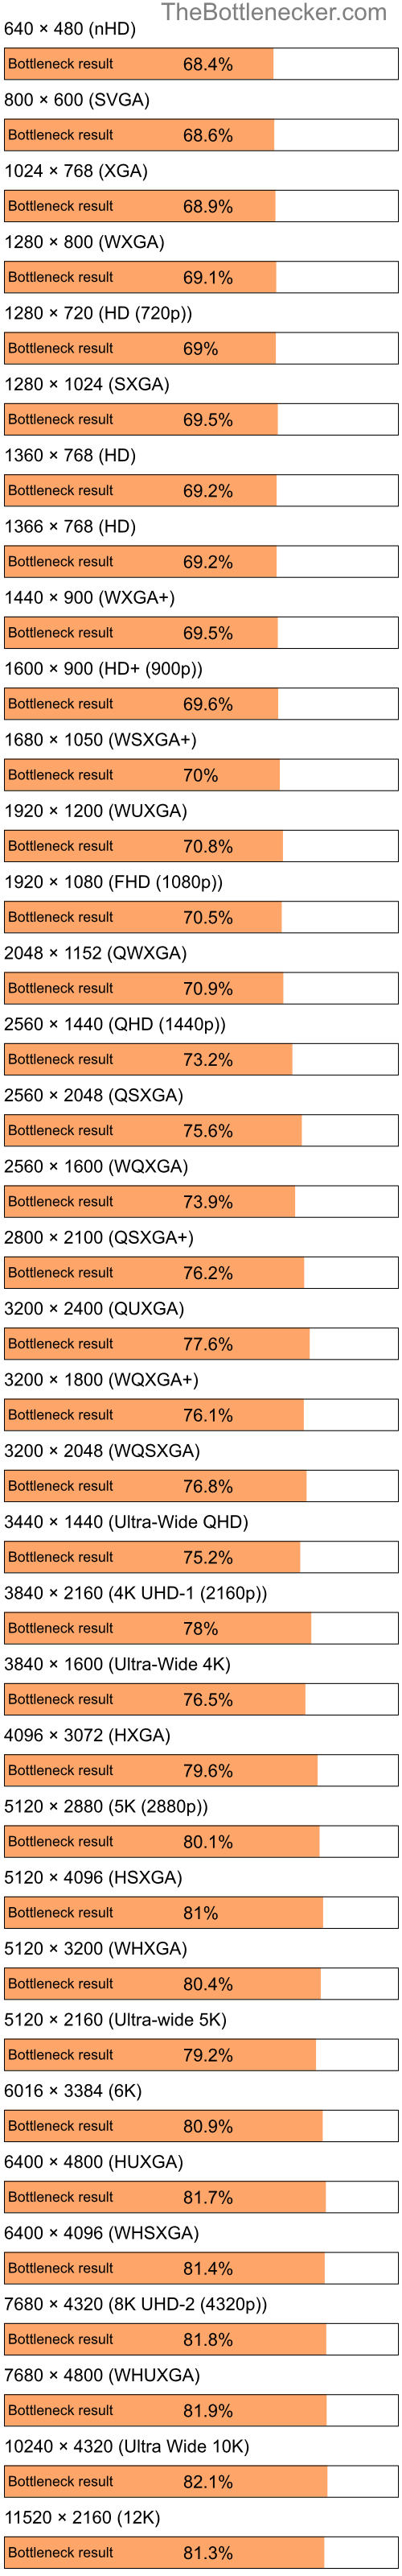 Bottleneck results by resolution for Intel Atom Z520 and AMD Mobility Radeon X1300 in Processor Intense Tasks